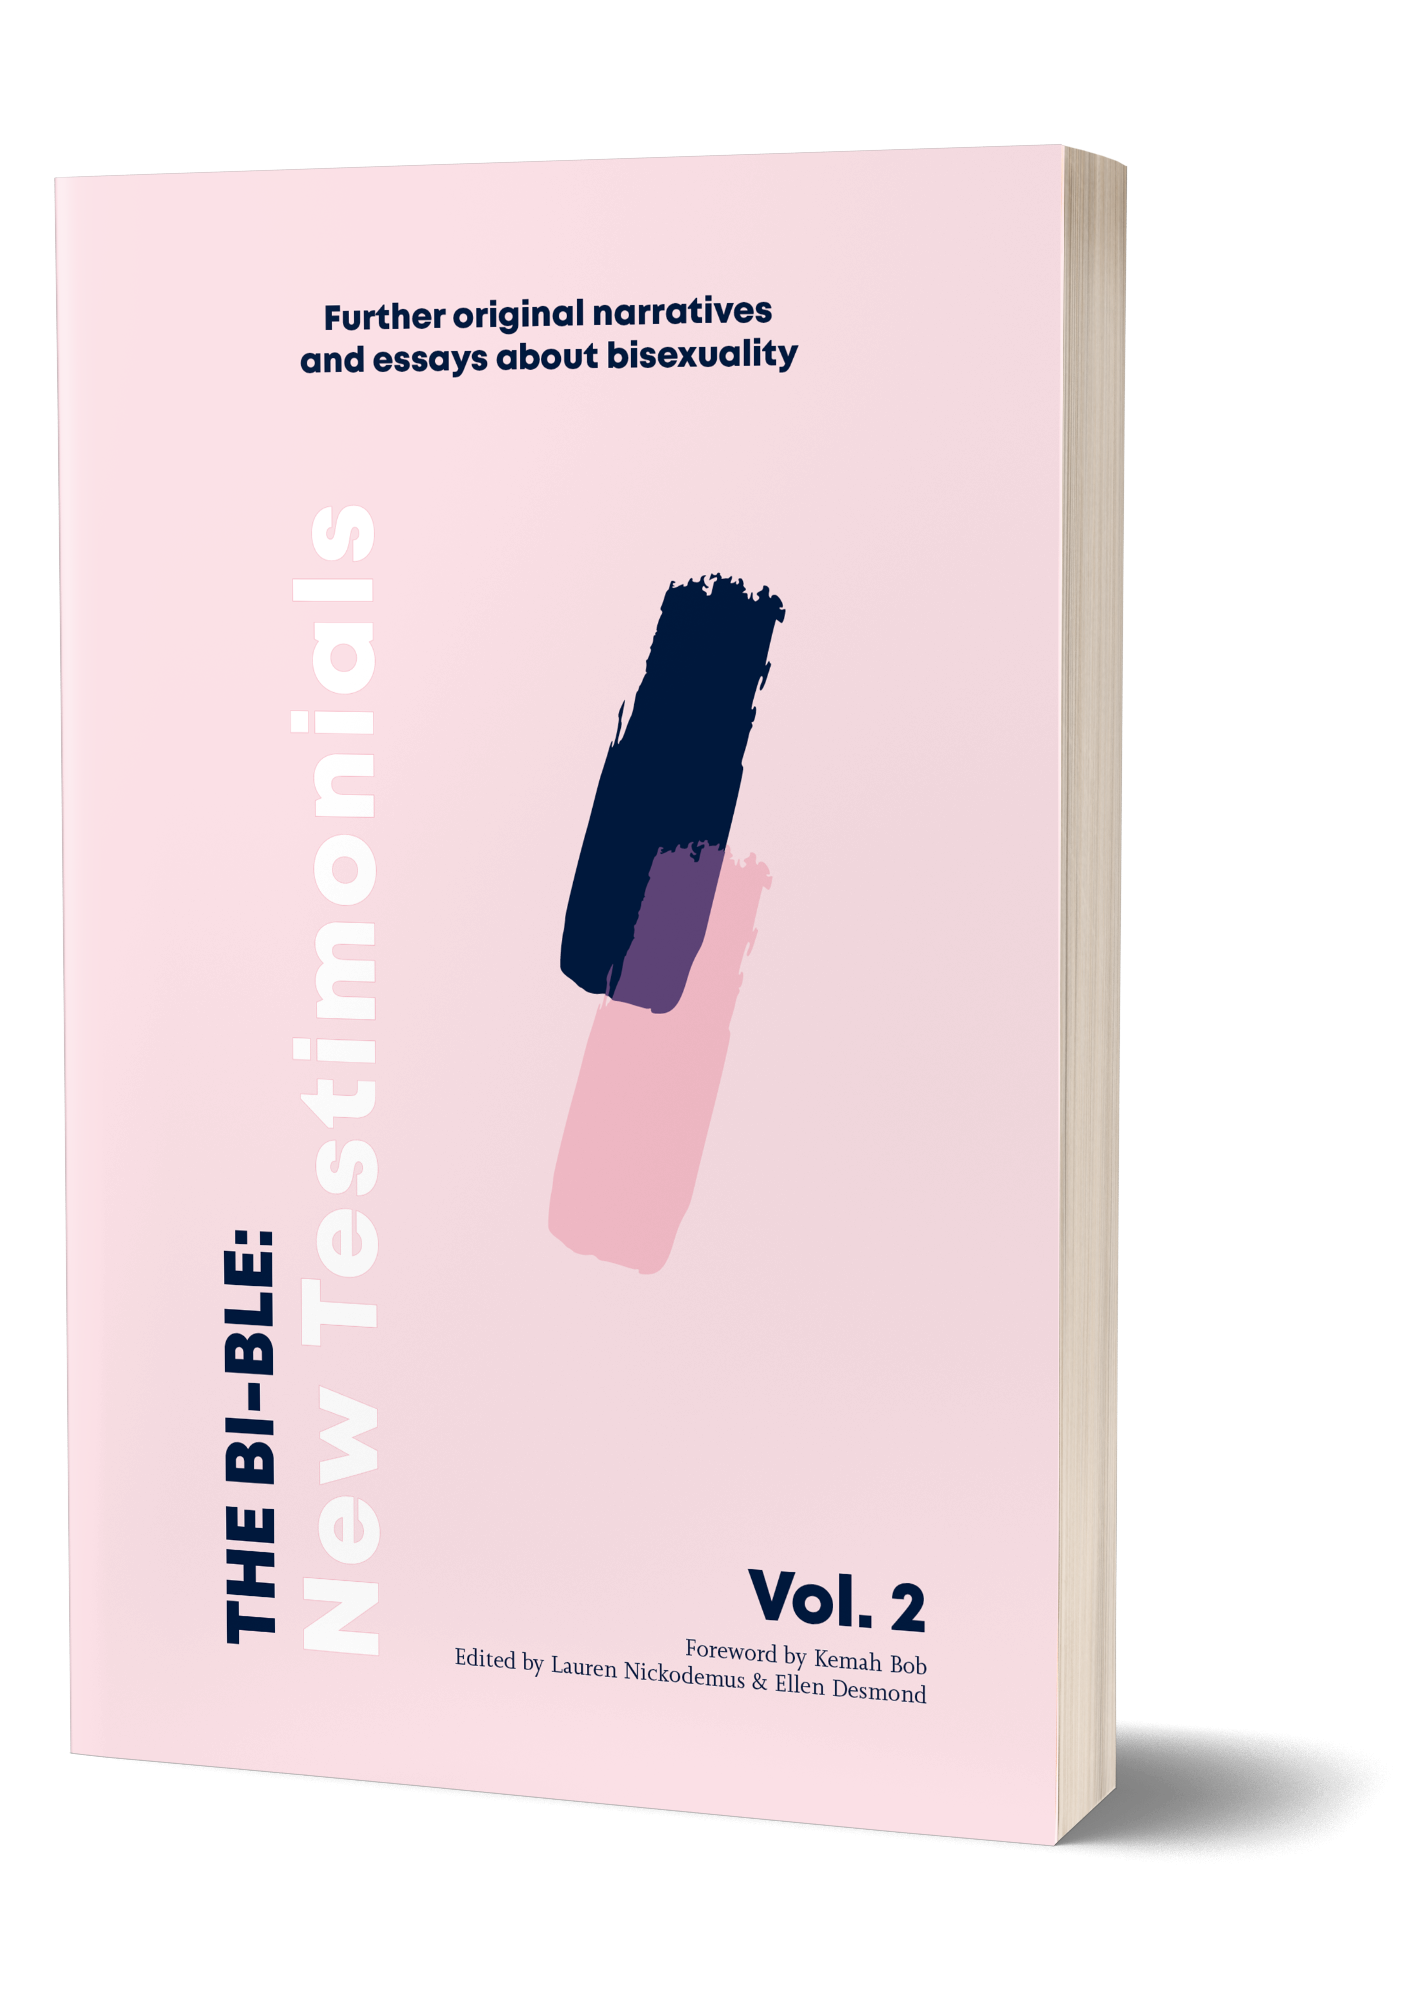 The cover of The Bible, spelled b i hyphen b l e Volume 2: New Testimonials. The cover is pastel pink and minimalist, with only two brushstrokes decorating it in the middle, one dark blue, one a darker pink. The rest of the text on the cover reads: Further original narratives and essays about bisexuality. Foreword by Kemah Bob, Edited by Lauren Nickodemus and Ellen Desmond.